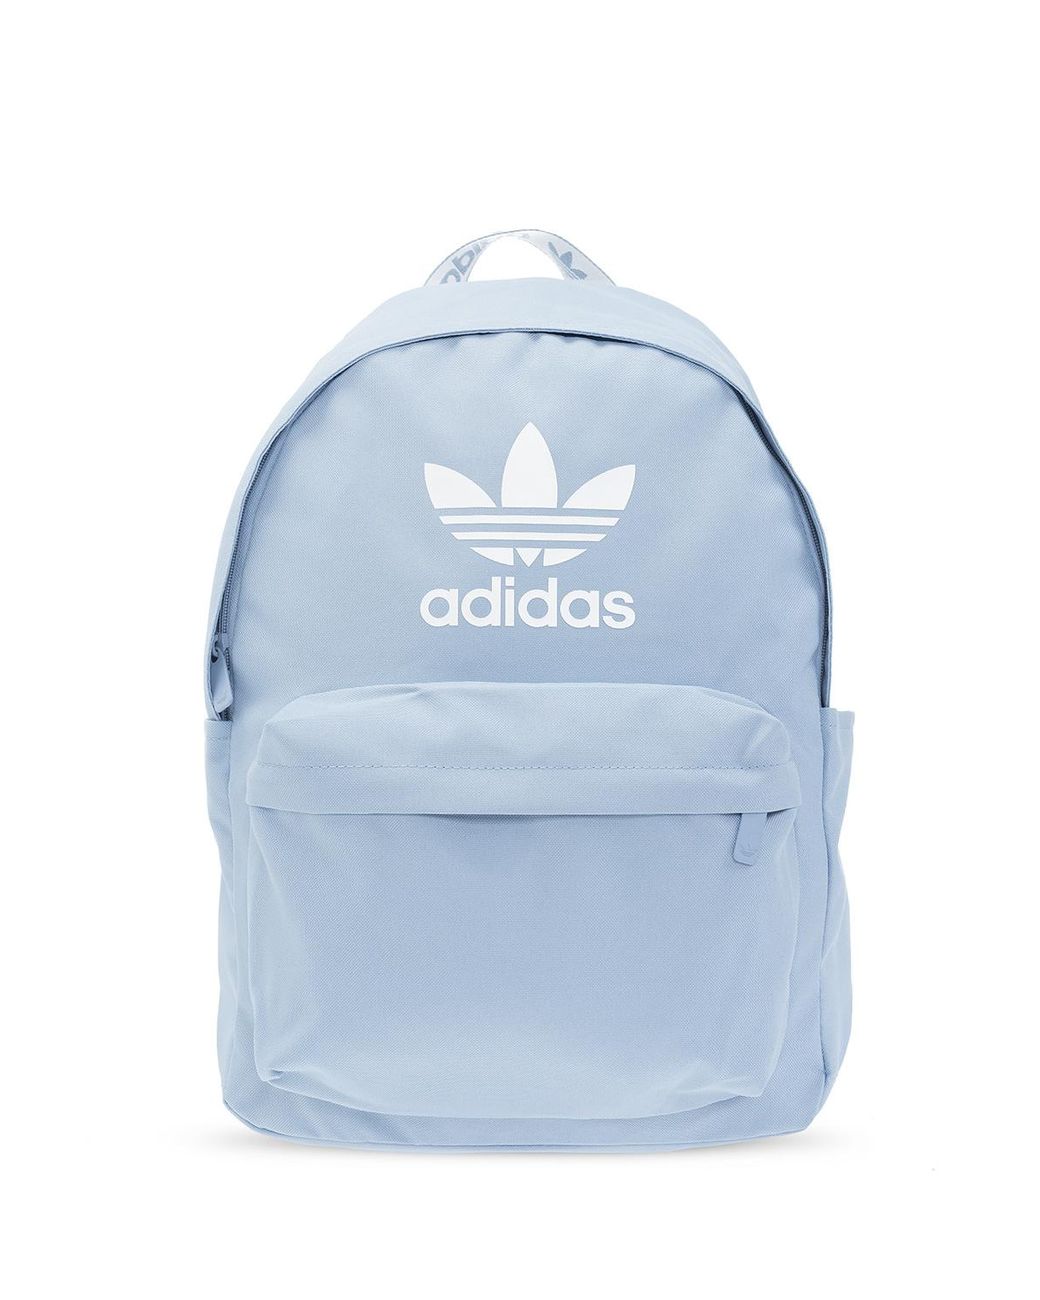 adidas Originals Backpack With Logo in Blue for Men | Lyst